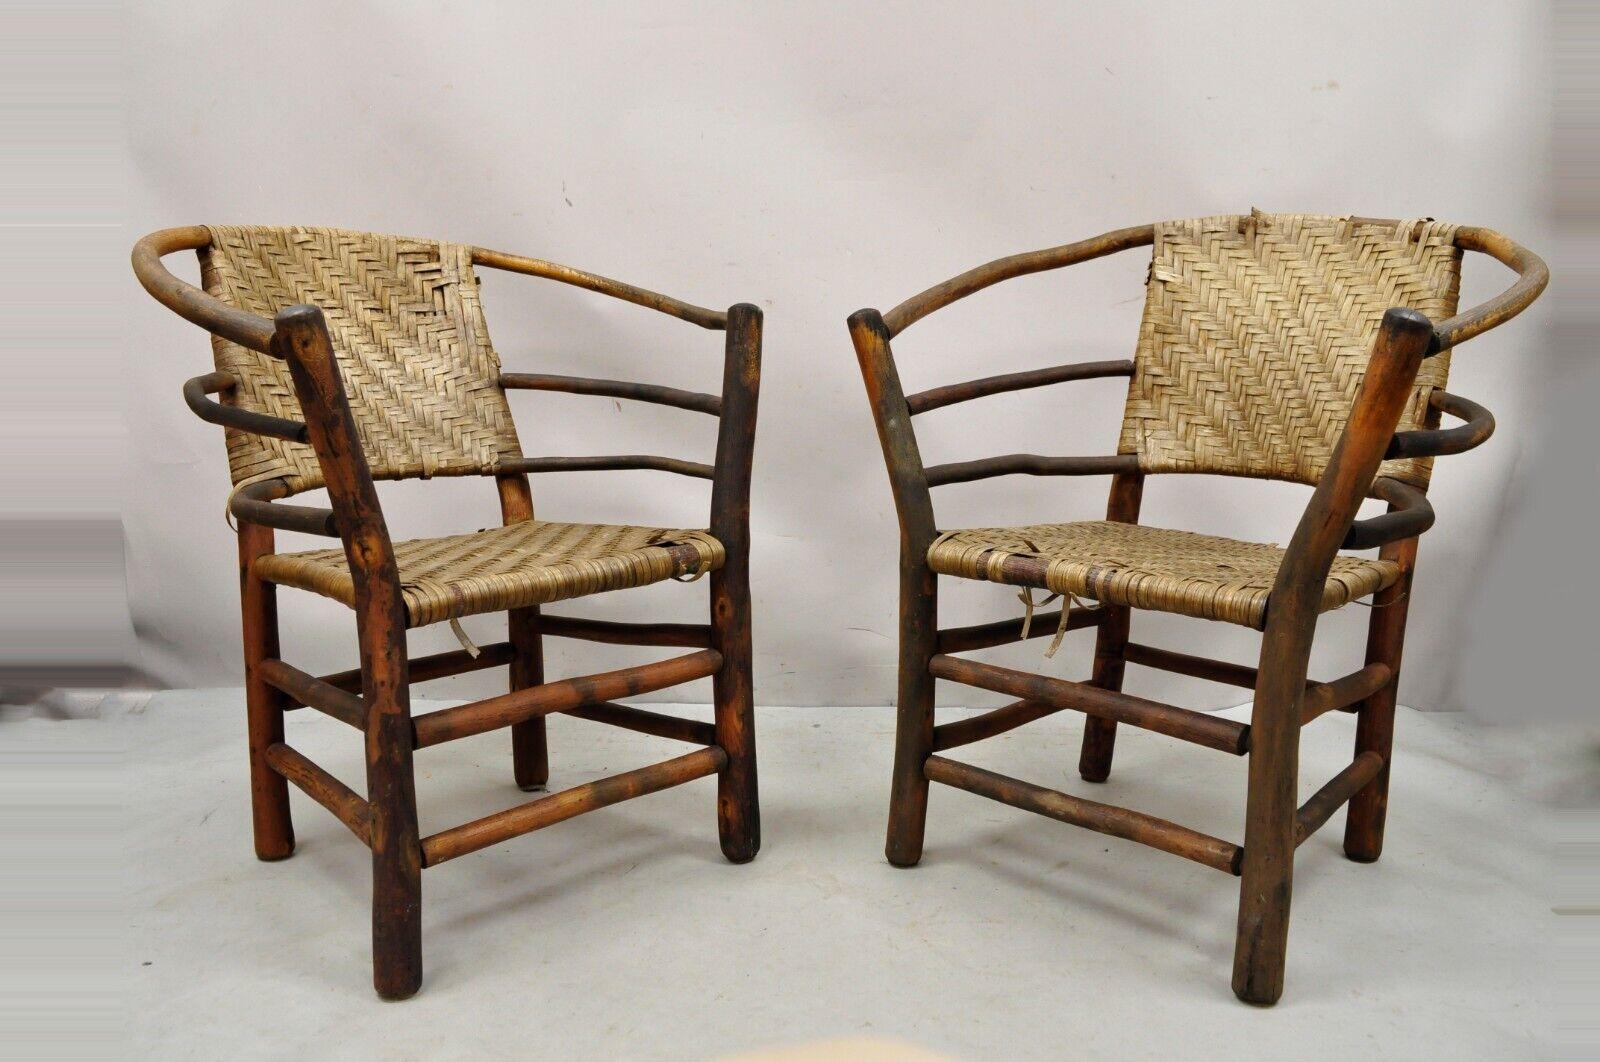 Vintage Adirondack Old Hickory Style Tree Branch wood Frame Rattan lounge chairs - a Pair. Item features woven rattan back and seats, nice wide frames, half round form, solid wood frames, distressed finish, very nice vintage pair, great to restore.